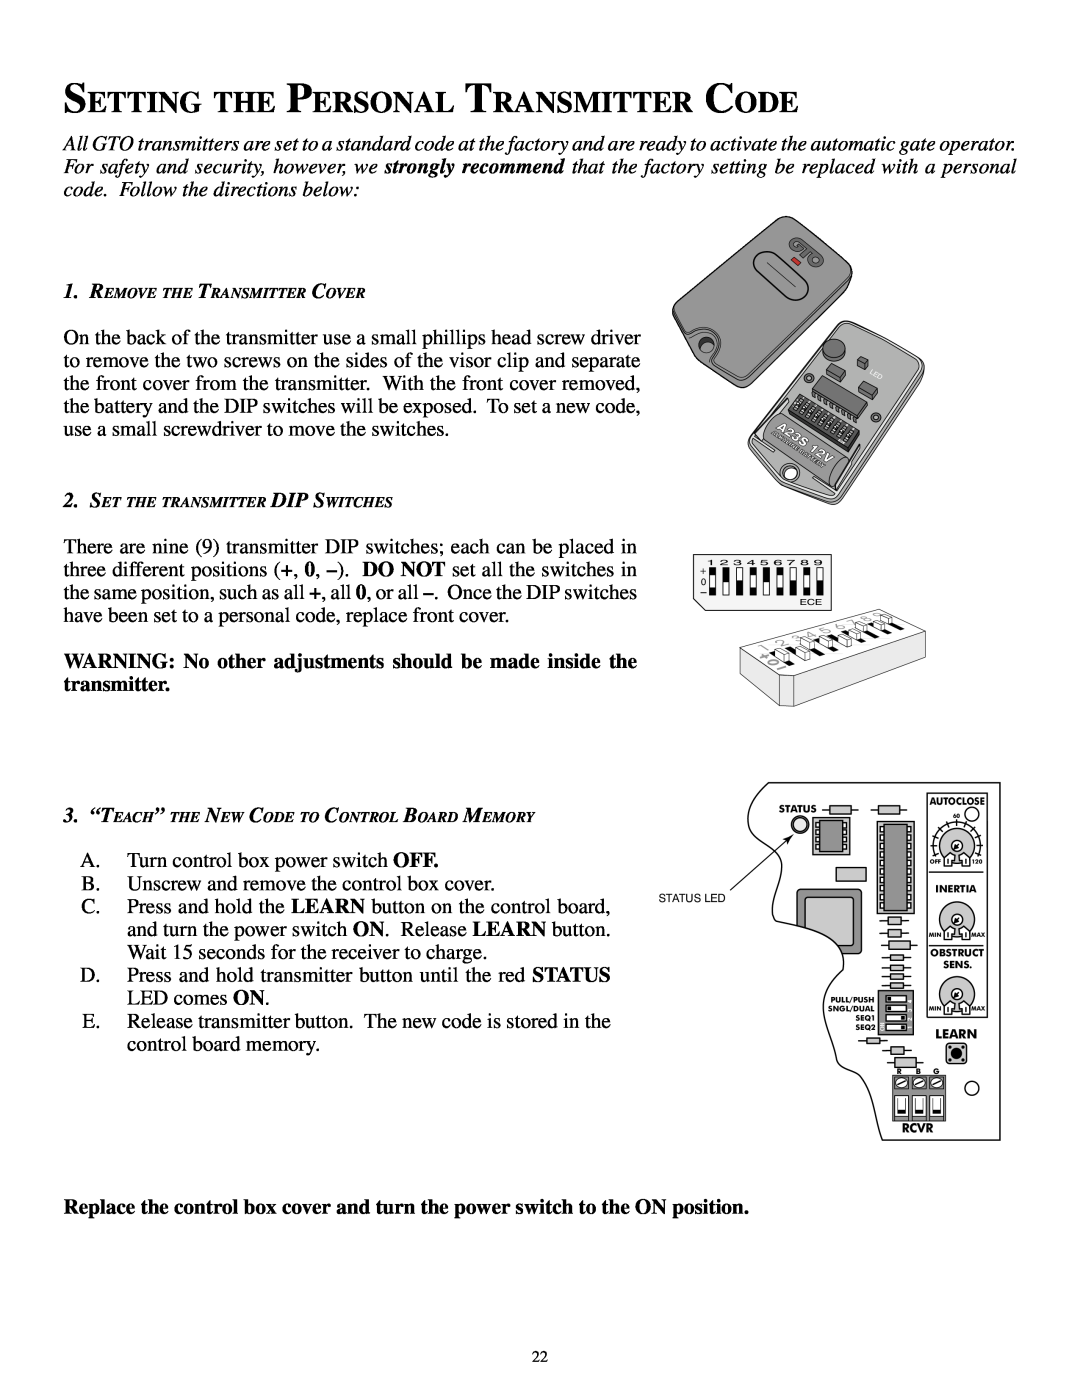 GTO SL-1000B Setting The Personal Transmitter Code, WARNING No other adjustments should be made inside the transmitter 